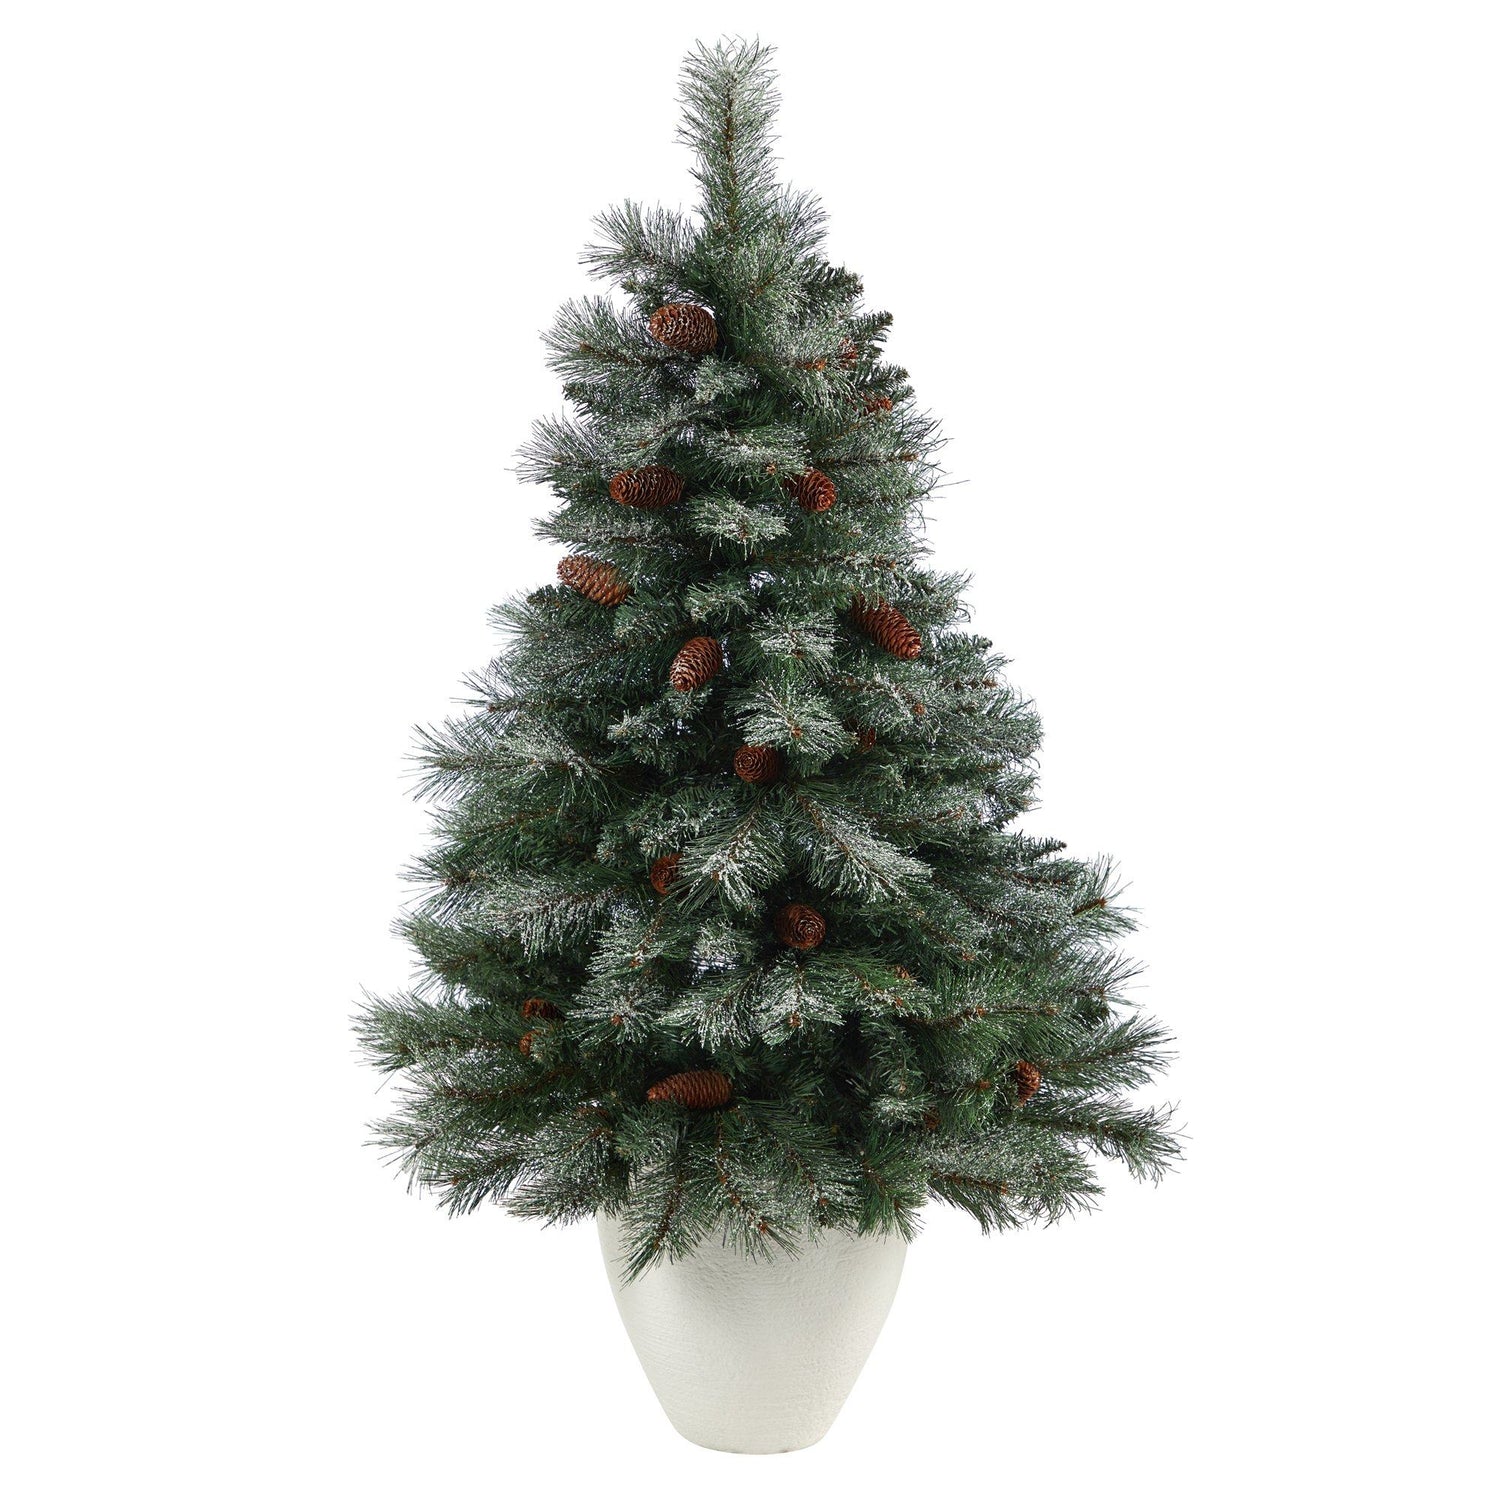 4’ Snowed French Alps Mountain Pine Artificial Christmas Tree with 237 Bendable Branches and Pine Cones in White Planter